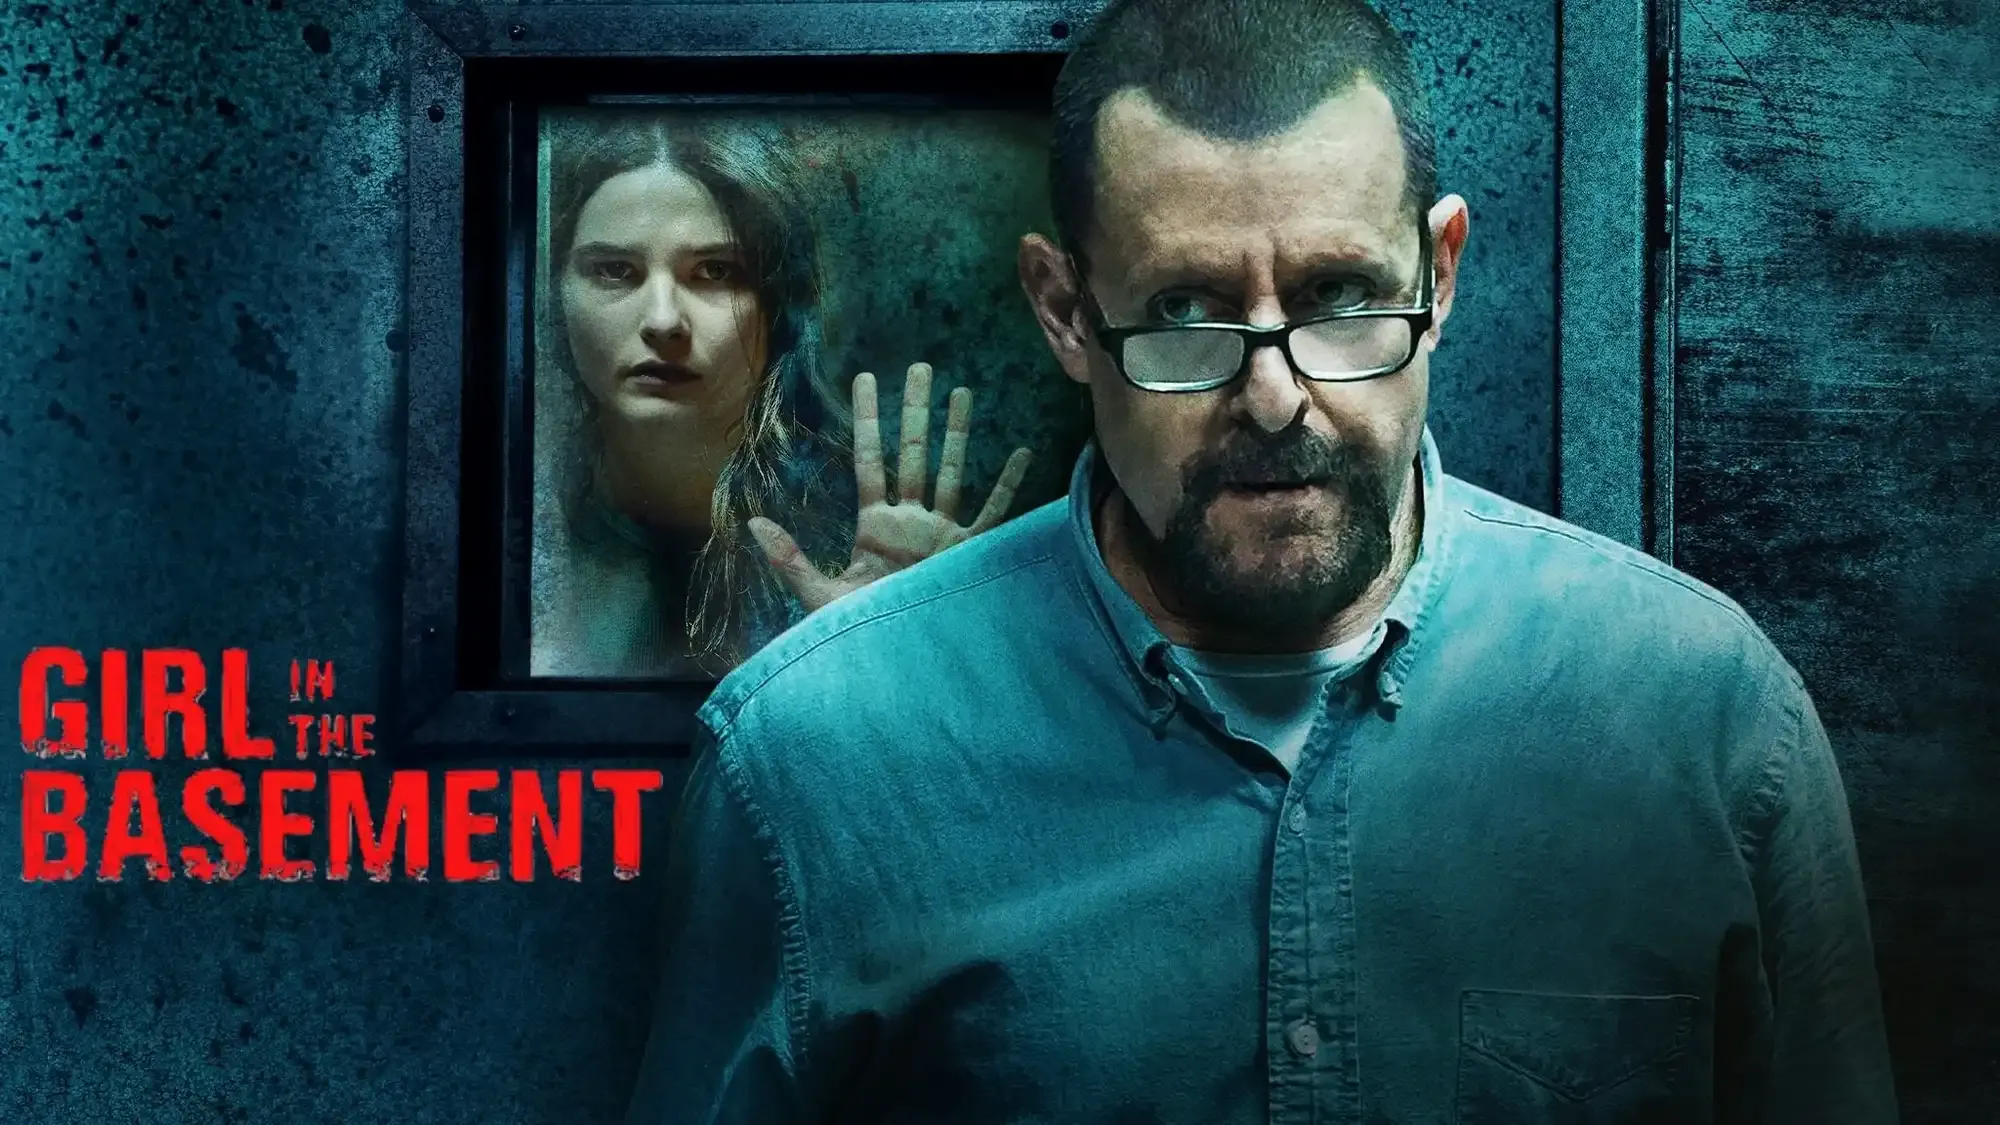 Girl in the Basement movie review